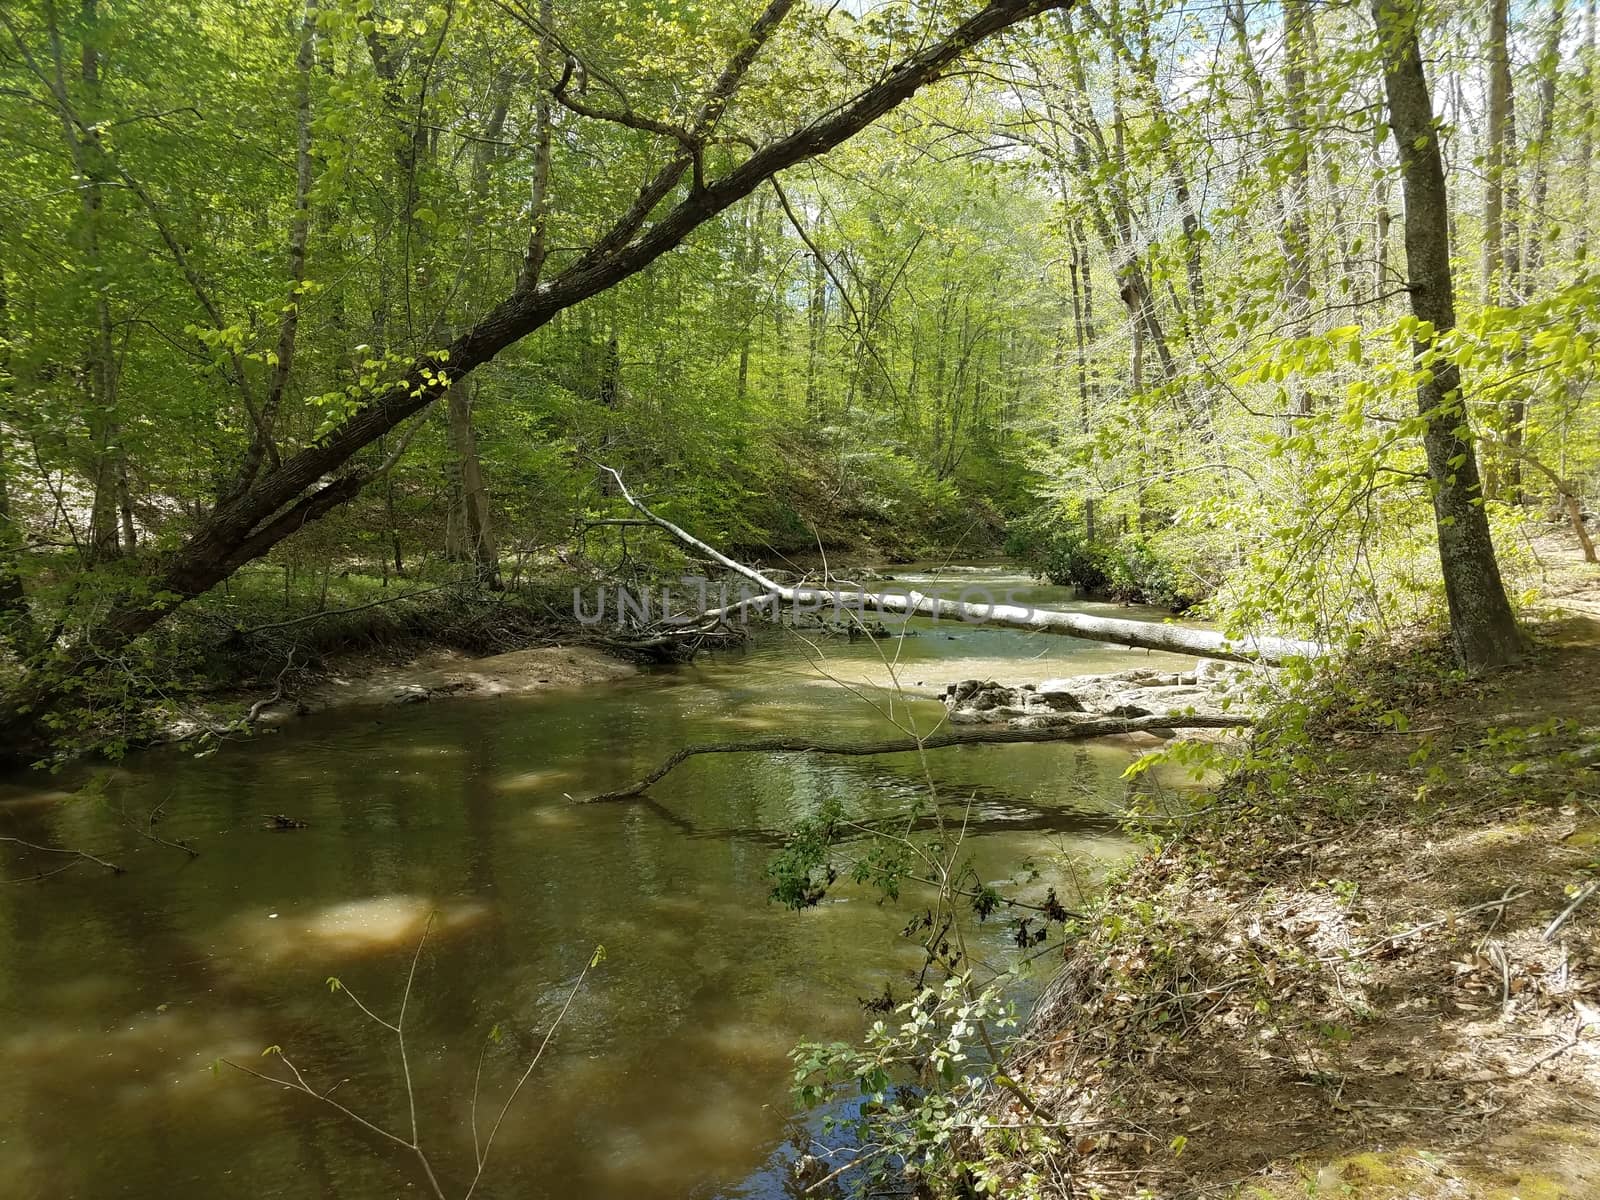 river or stream with rocks and trees in forest by stockphotofan1